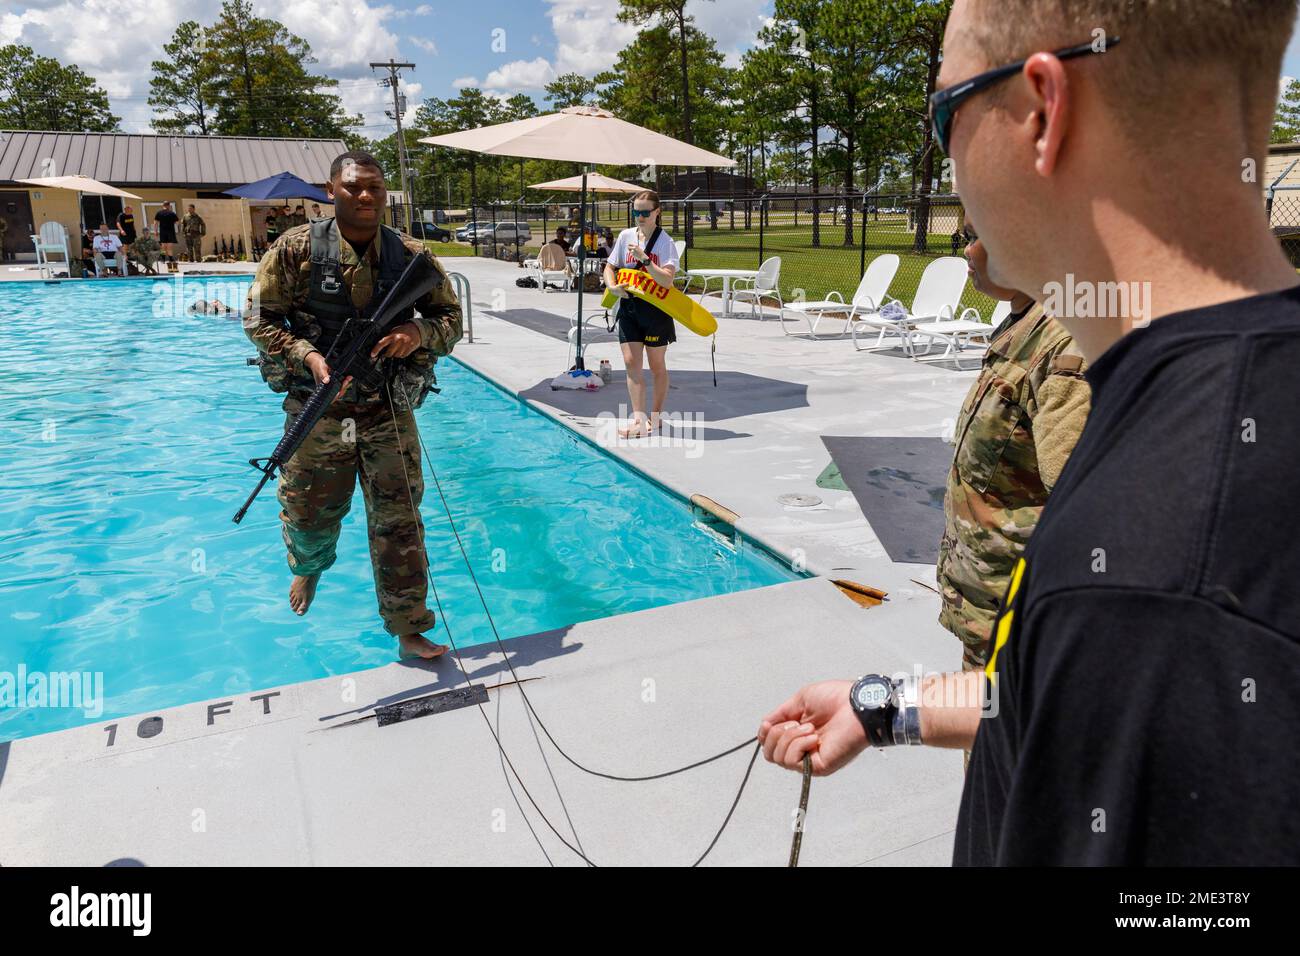 Army Reserve Capt. Christopher Carroll, human resource officer for the 160th Military Police Battalion, jumps into a pool as, 1st Lt. Thomas Harvey, executive officer for the 308th Military police company, 535th MP Battalion, holds a cord tied to Capt. Carroll’s rifle during water survival training, July 27, 2022, at Camp Shelby Joint Forces Training Center, Mississippi. After entering the water, Capt. Carroll removed his gear and swam to the end of the pool while 1st Lt. Harvey pulled the rifle from the water. (Arizona Army National Guard photo by Sgt. 1st Class Brian A. Barbour) Stock Photo